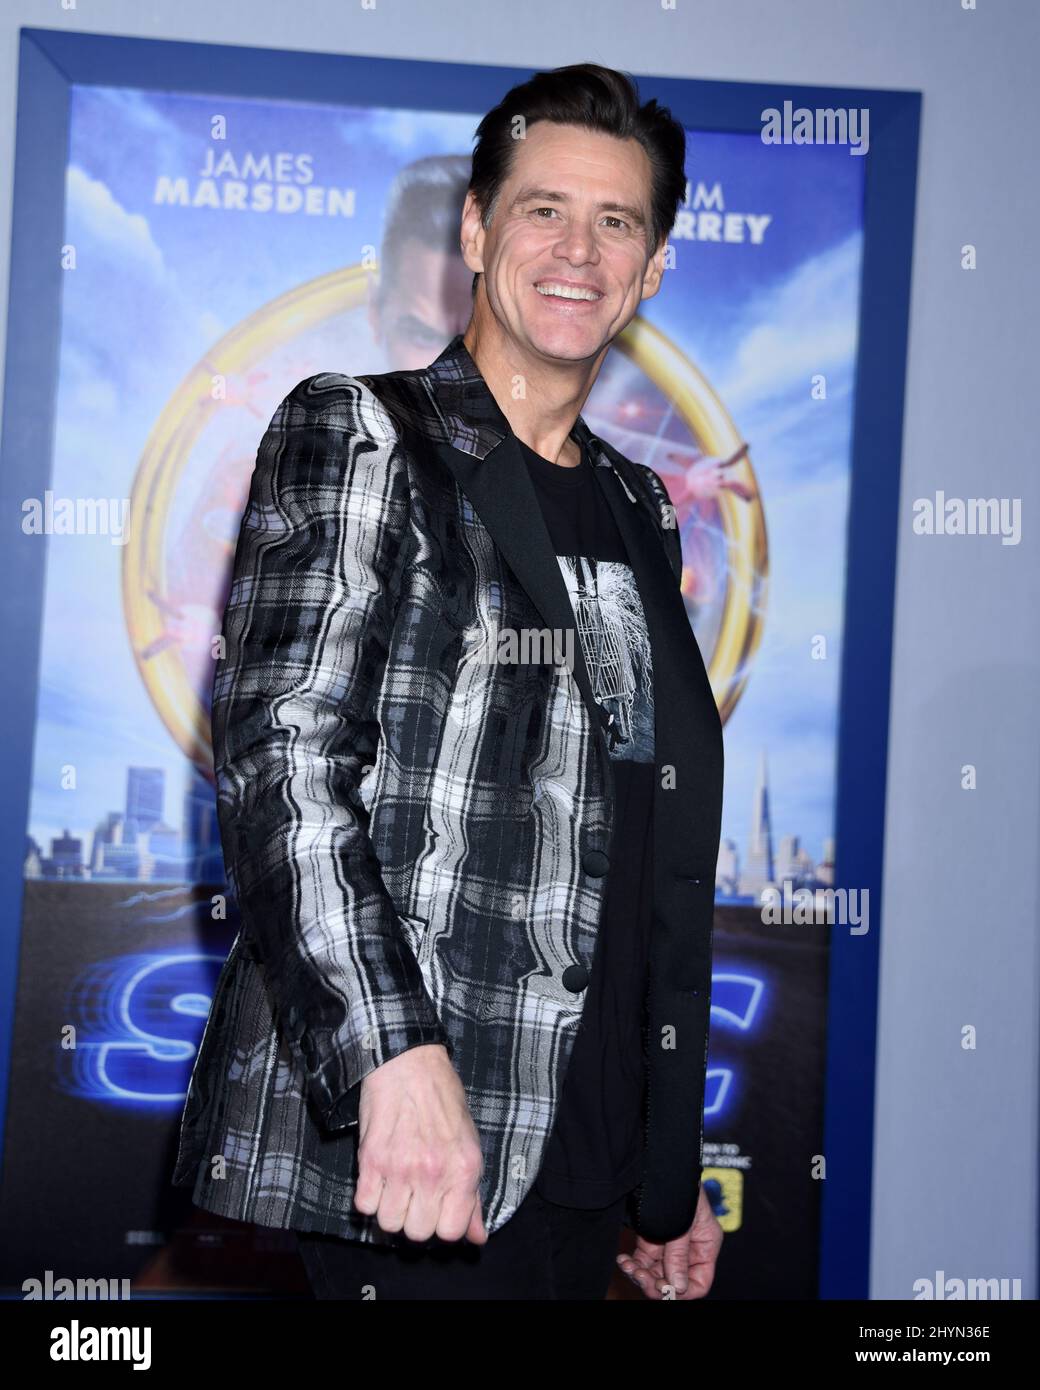 Jim Carrey at the 'Sonic The Hedgehog' Special Screening held at the Regency Village Theatre Stock Photo